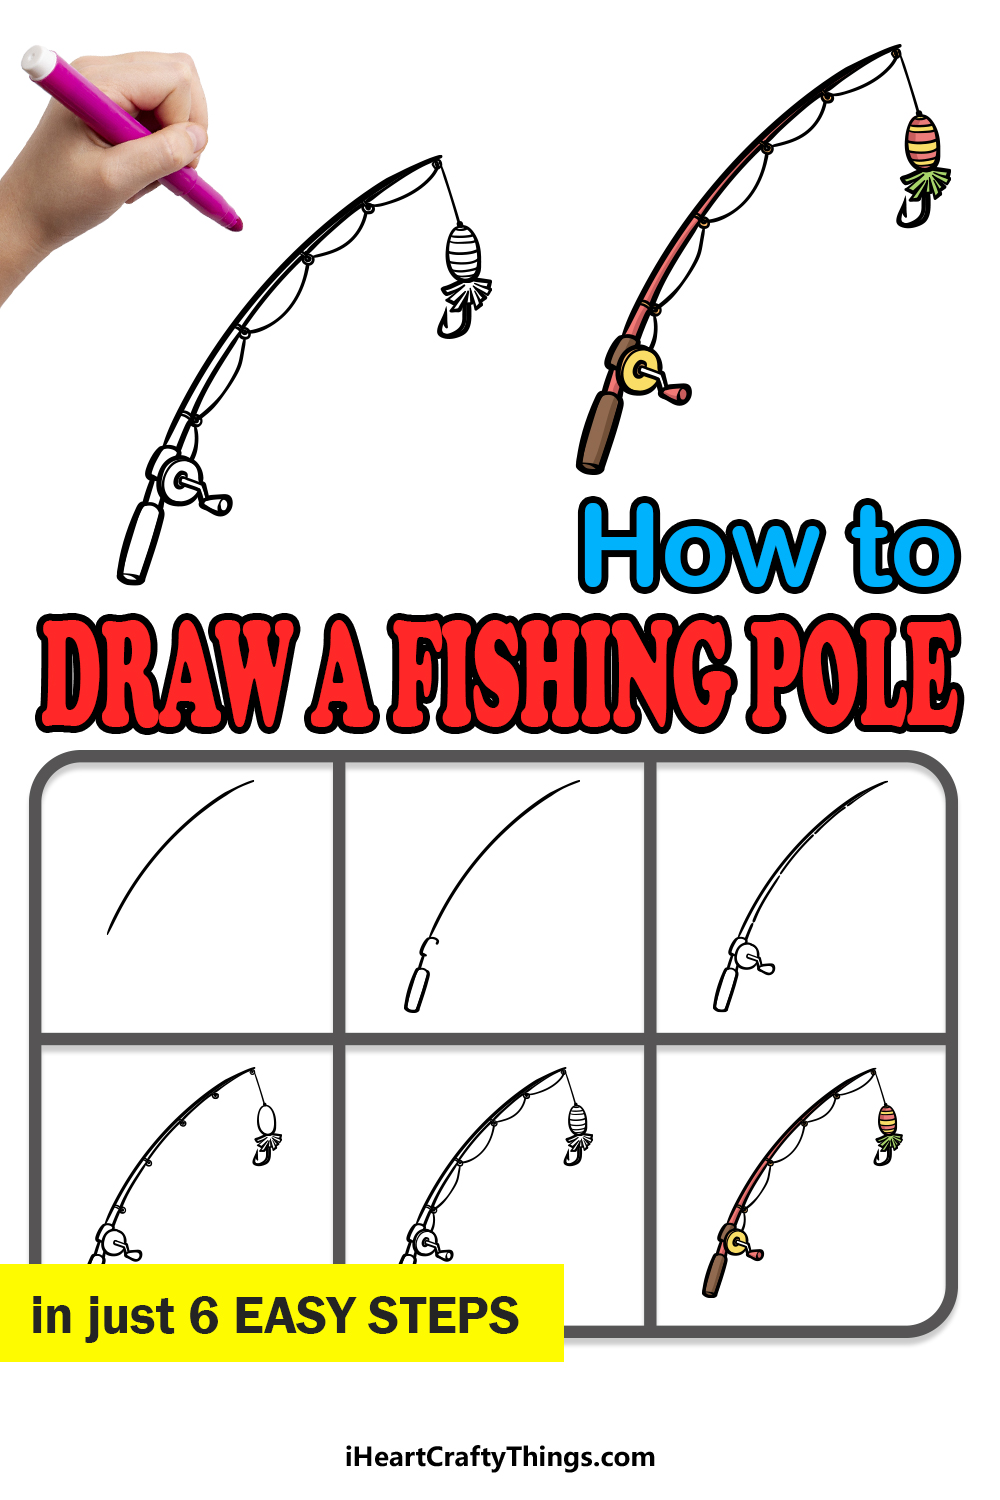 how to draw a fishing pole in 6 easy steps